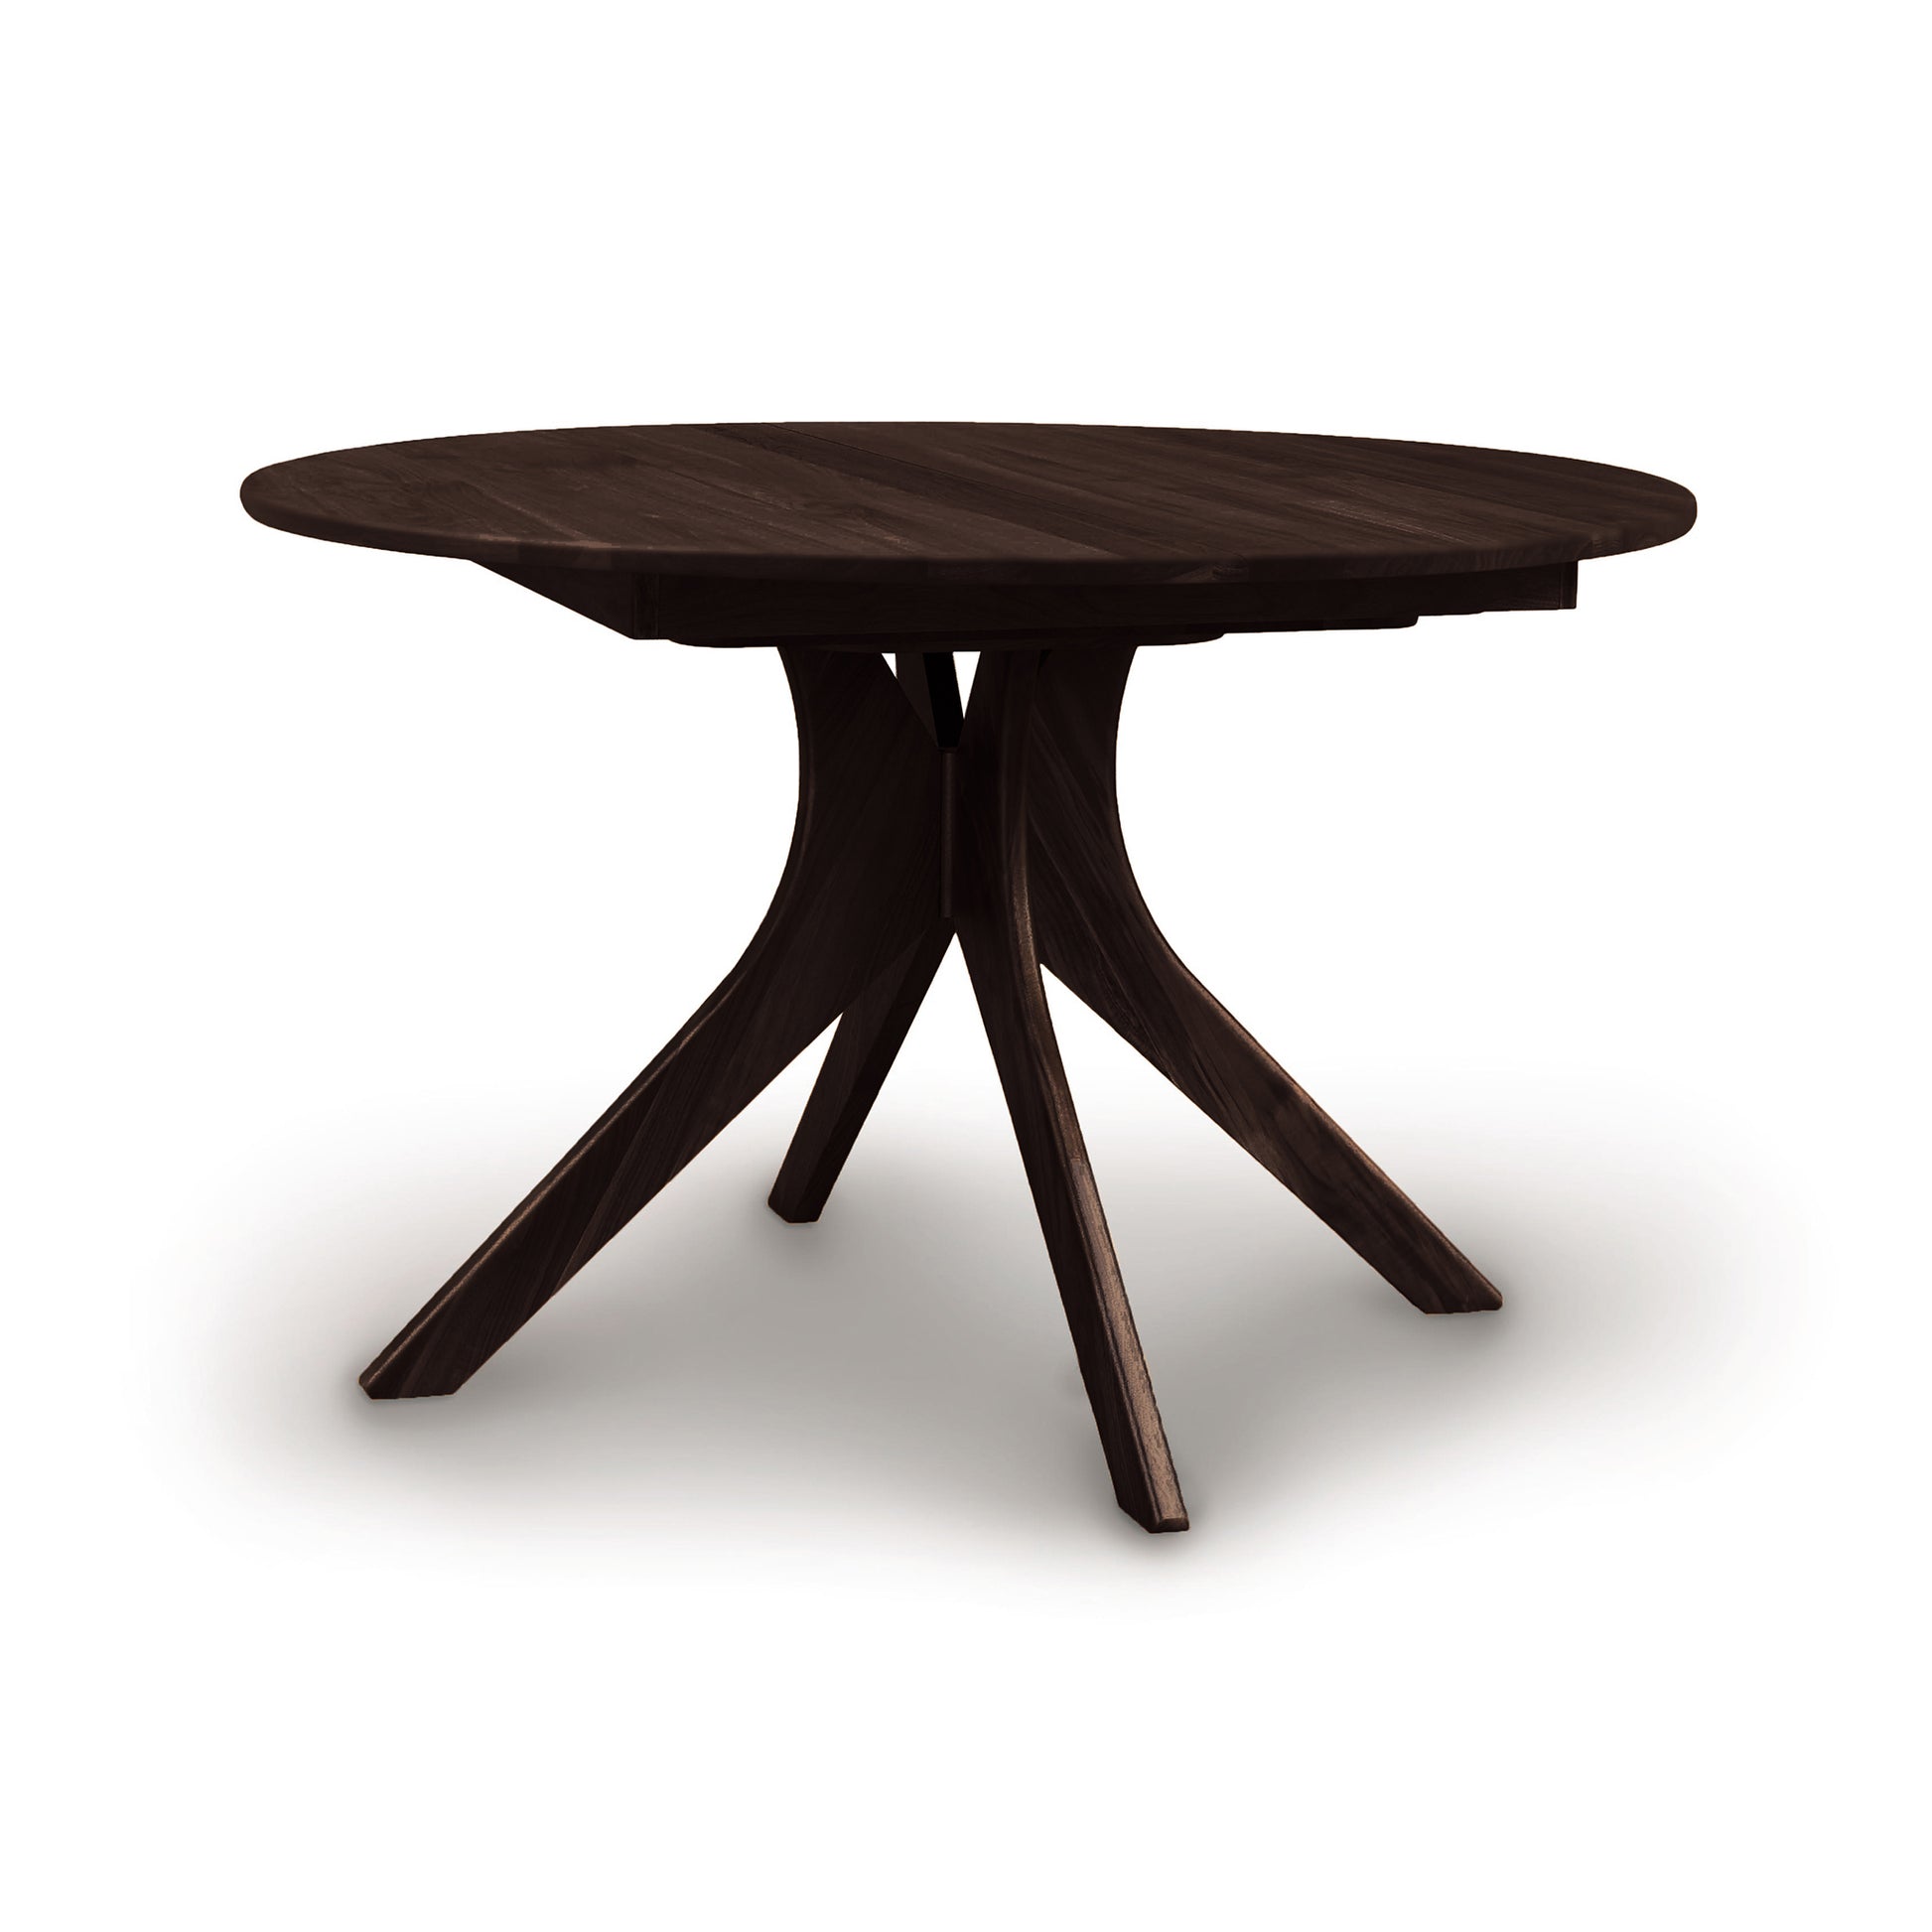 A round, dark solid wood Audrey Round Extension Dining Table with a unique pedestal base and a butterfly leaf mechanism, isolated on a white background by Copeland Furniture.